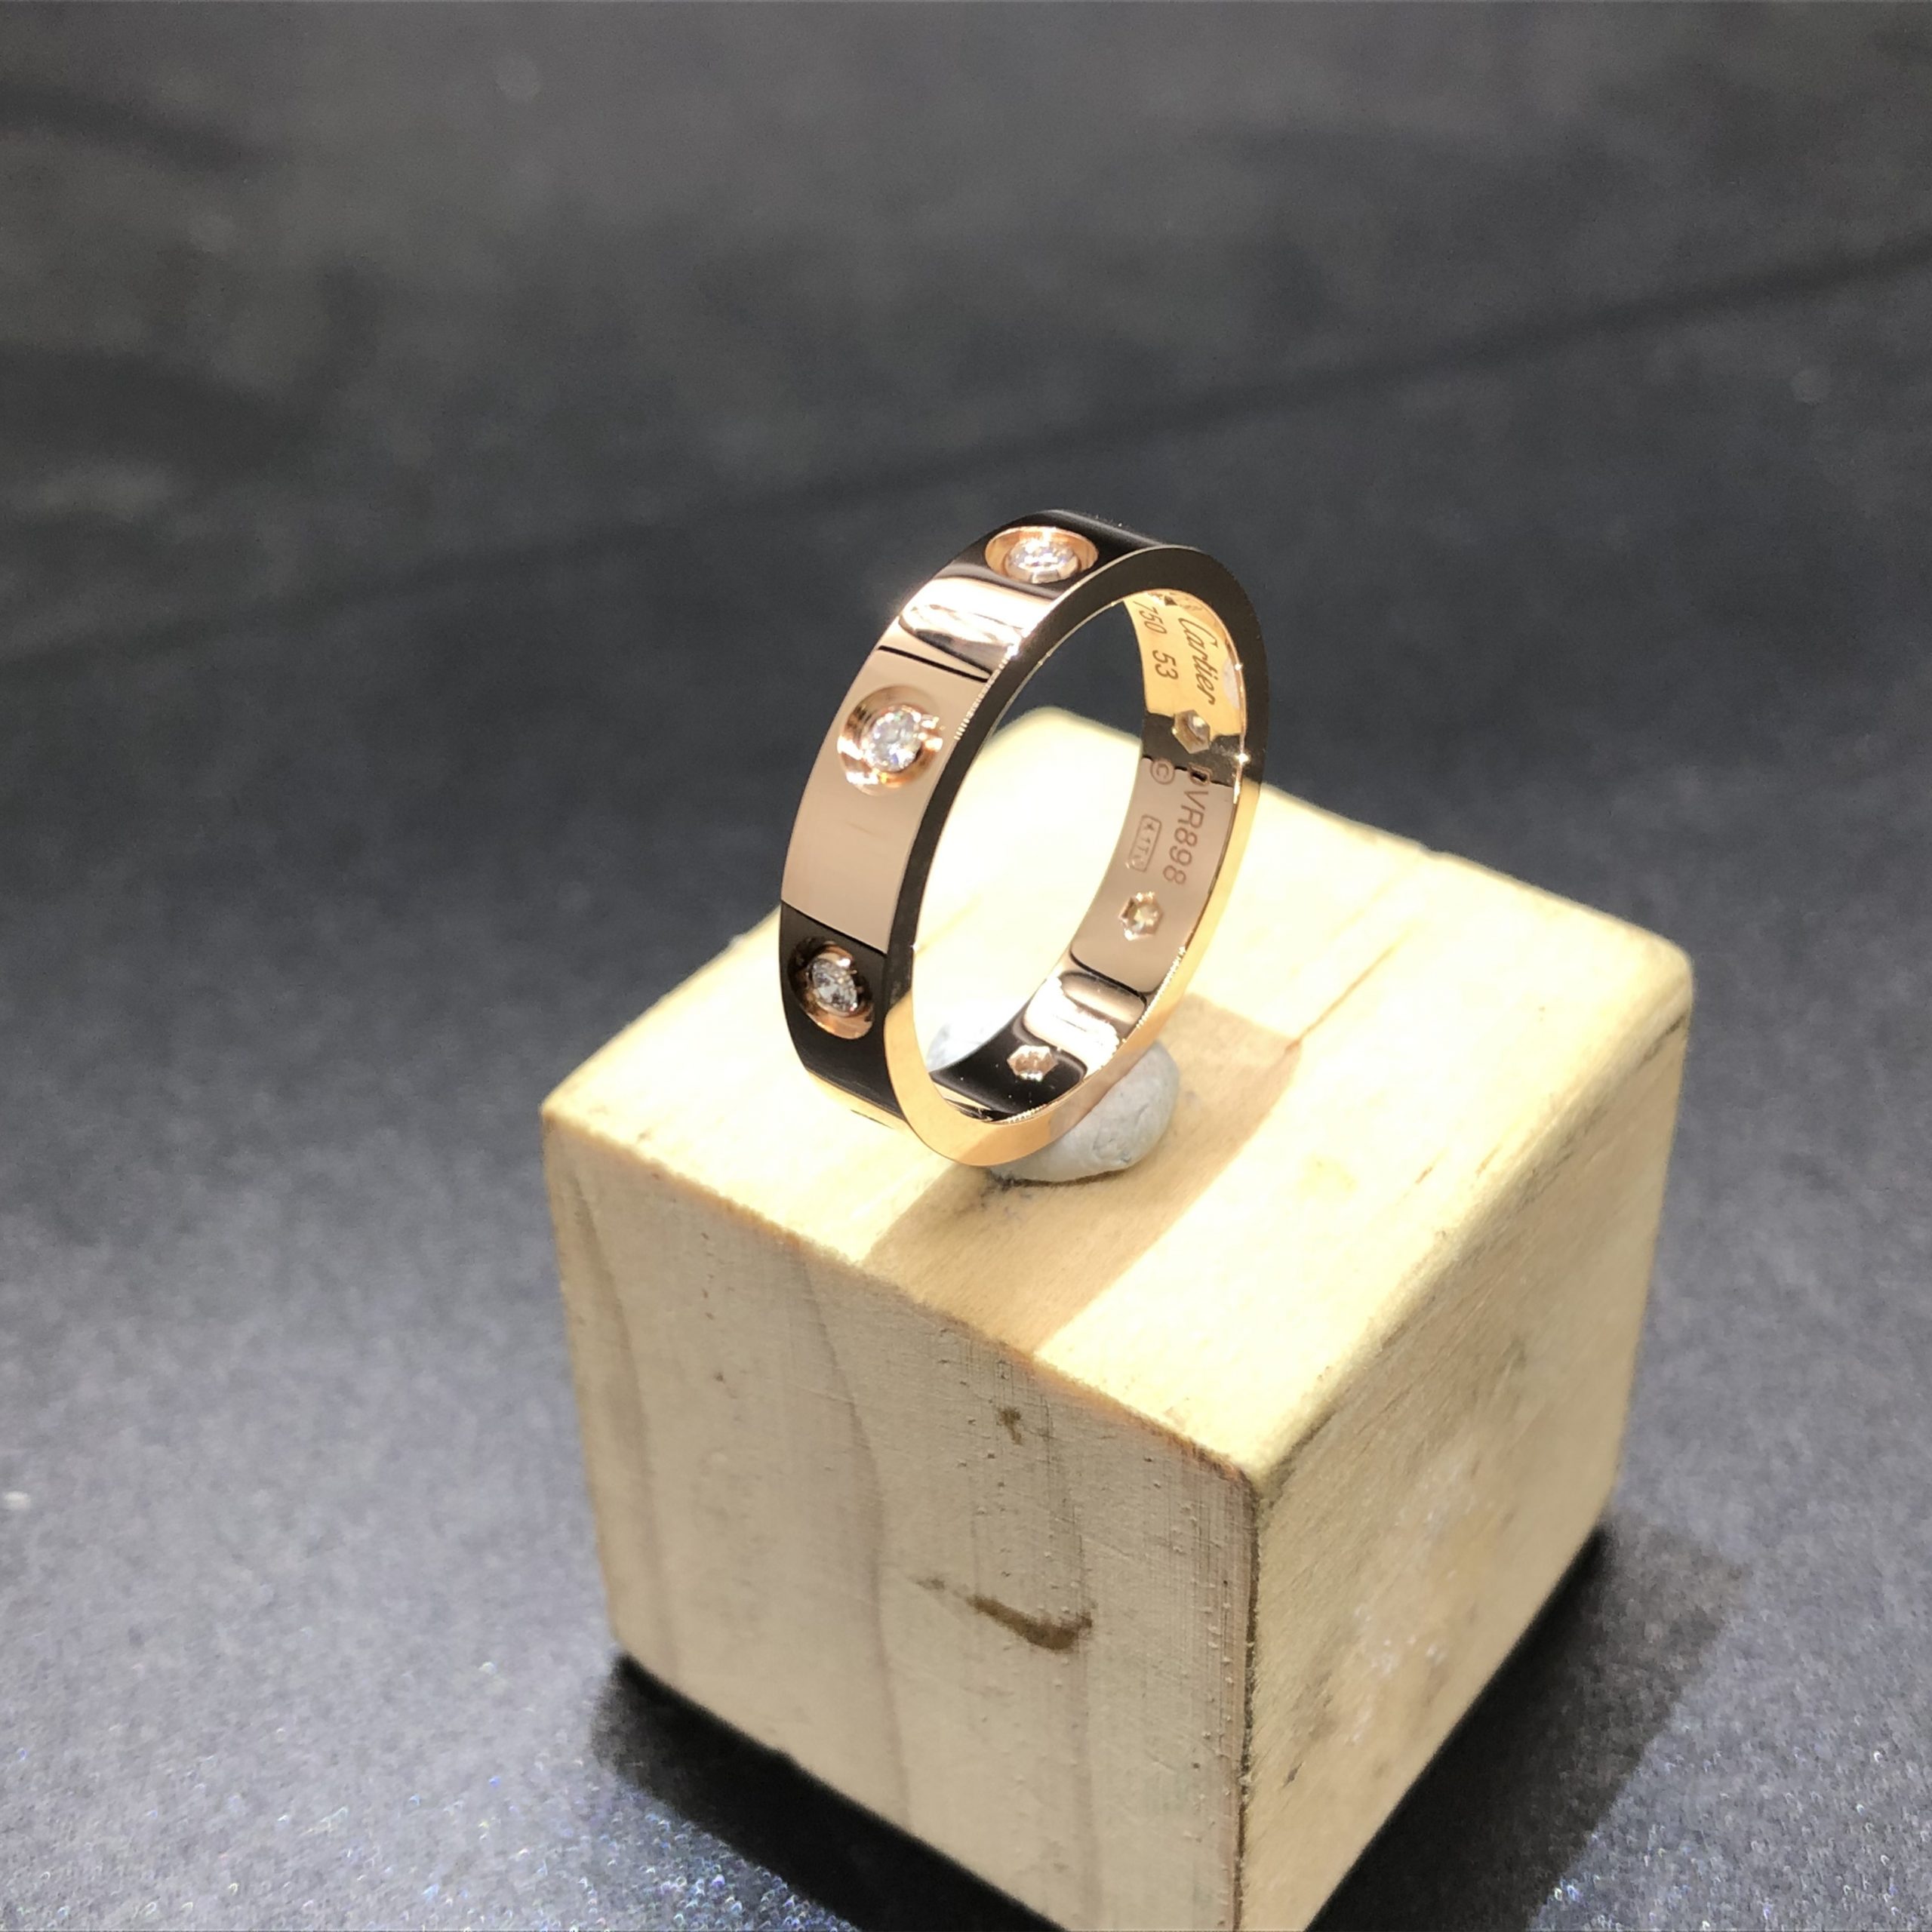 Cartier Love Wedding Band With 8 Diamonds Custom Made in 18K Rose Gold